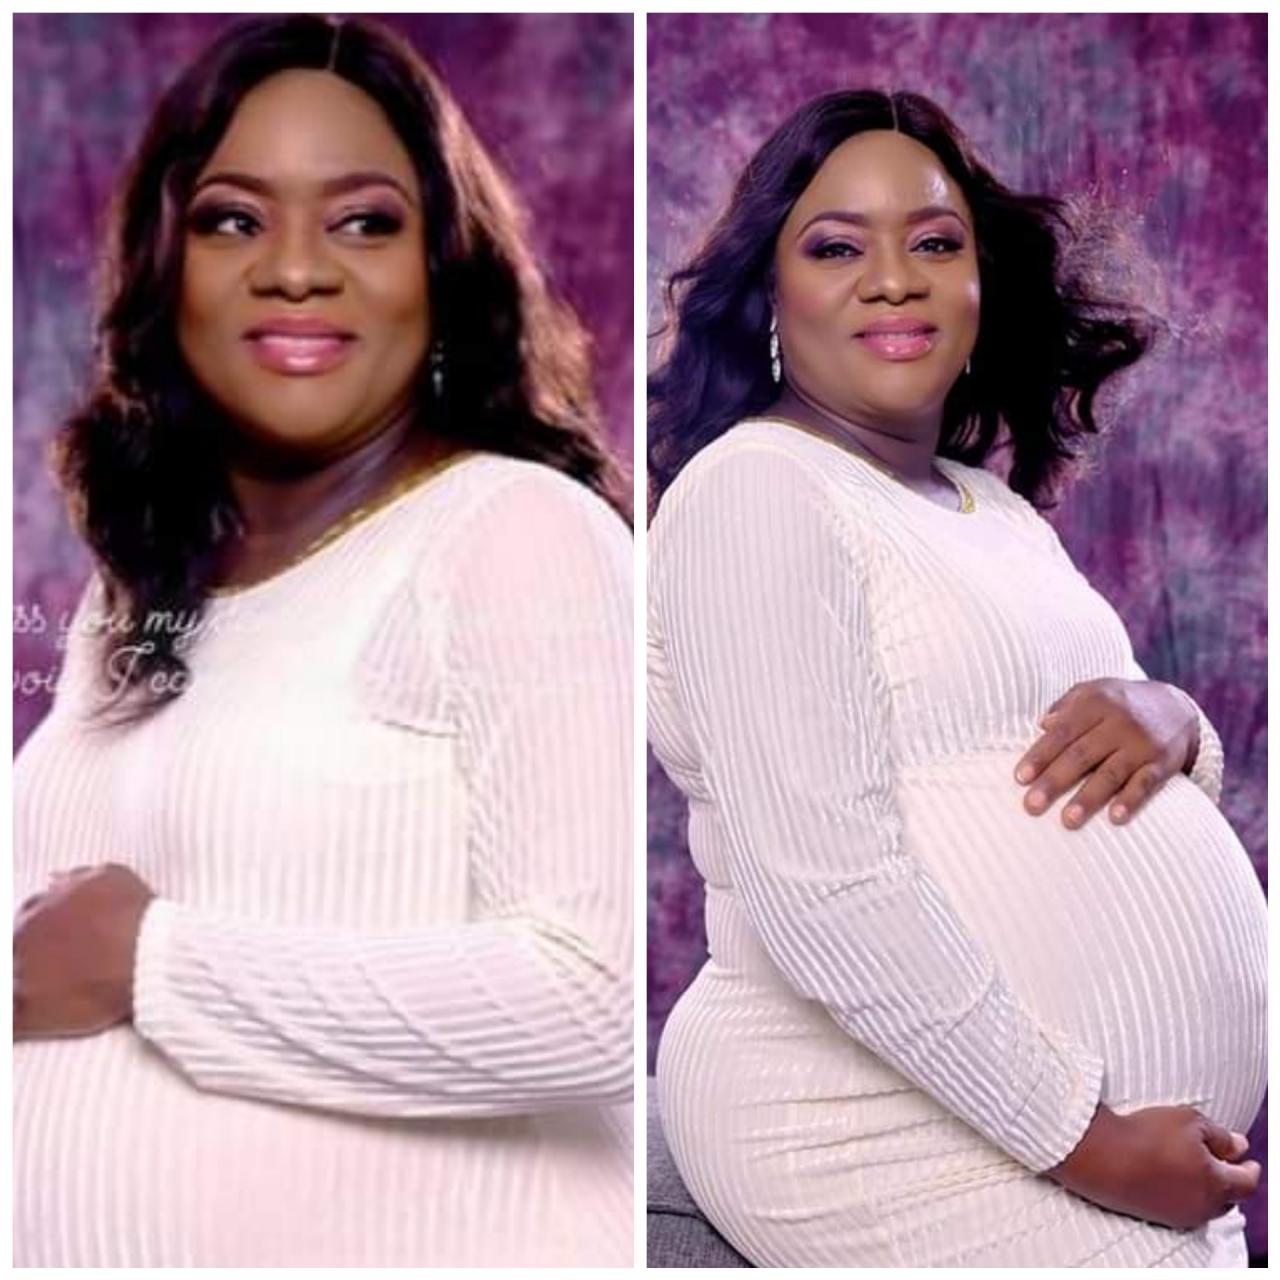 After 10 years of waiting, Nigerian woman dies on Christmas Day two days after giving birth to twins 